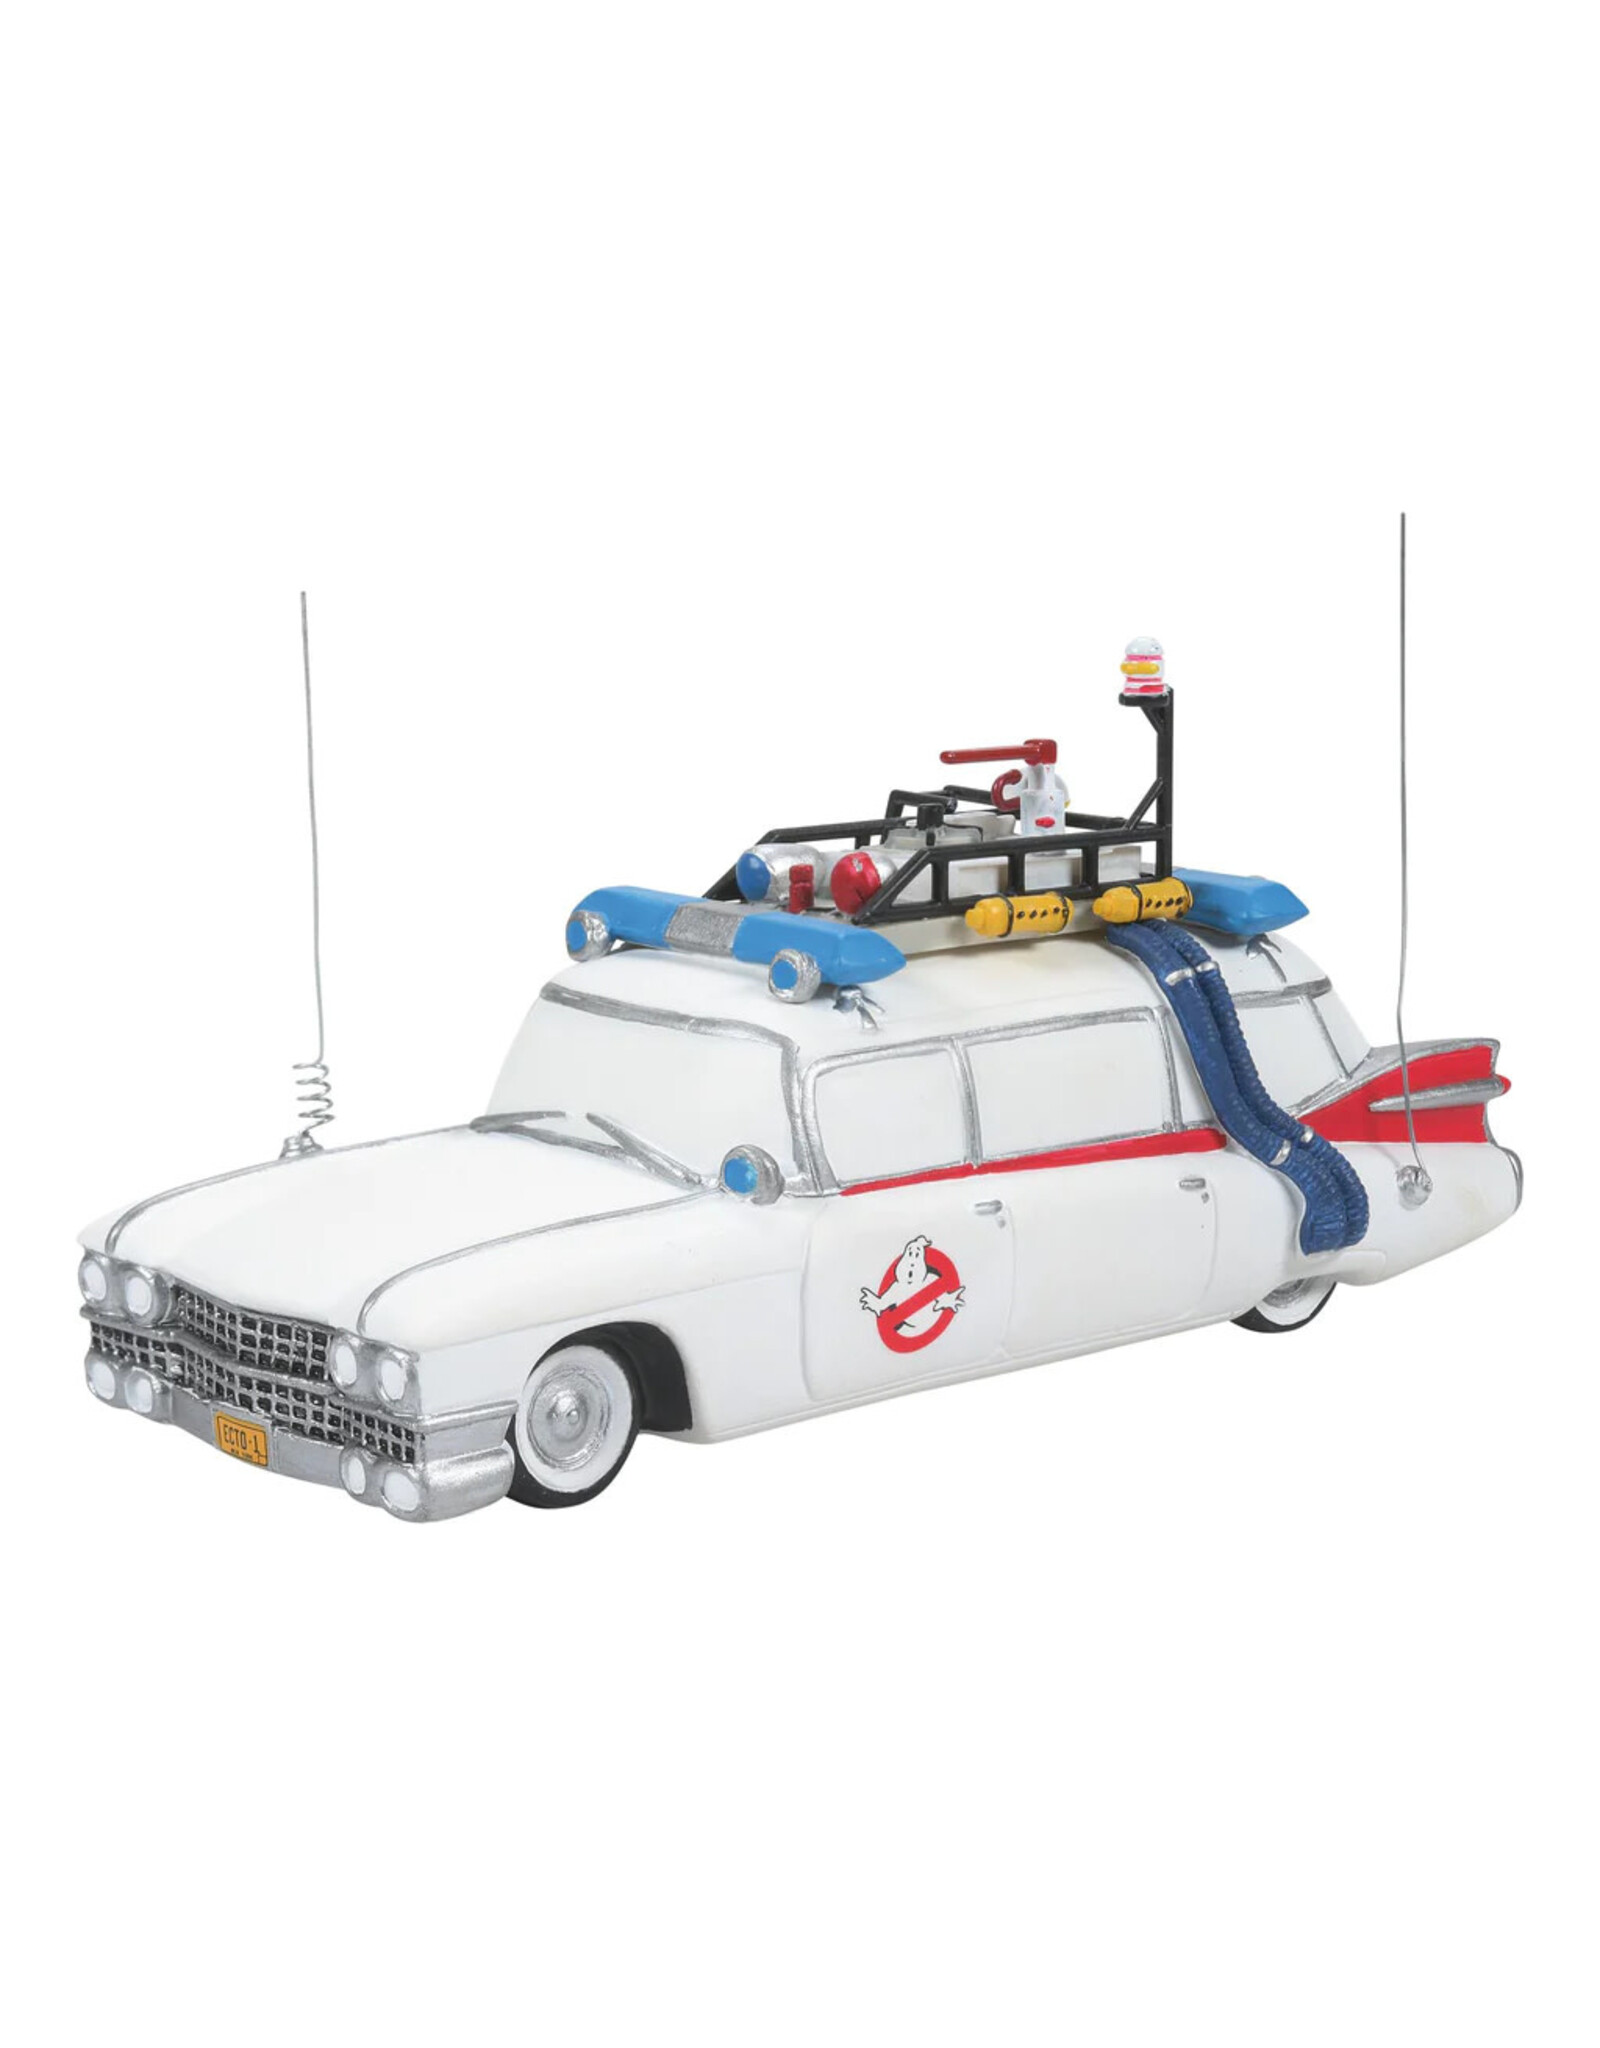 Department 56 Ghostbusters Ecto-1